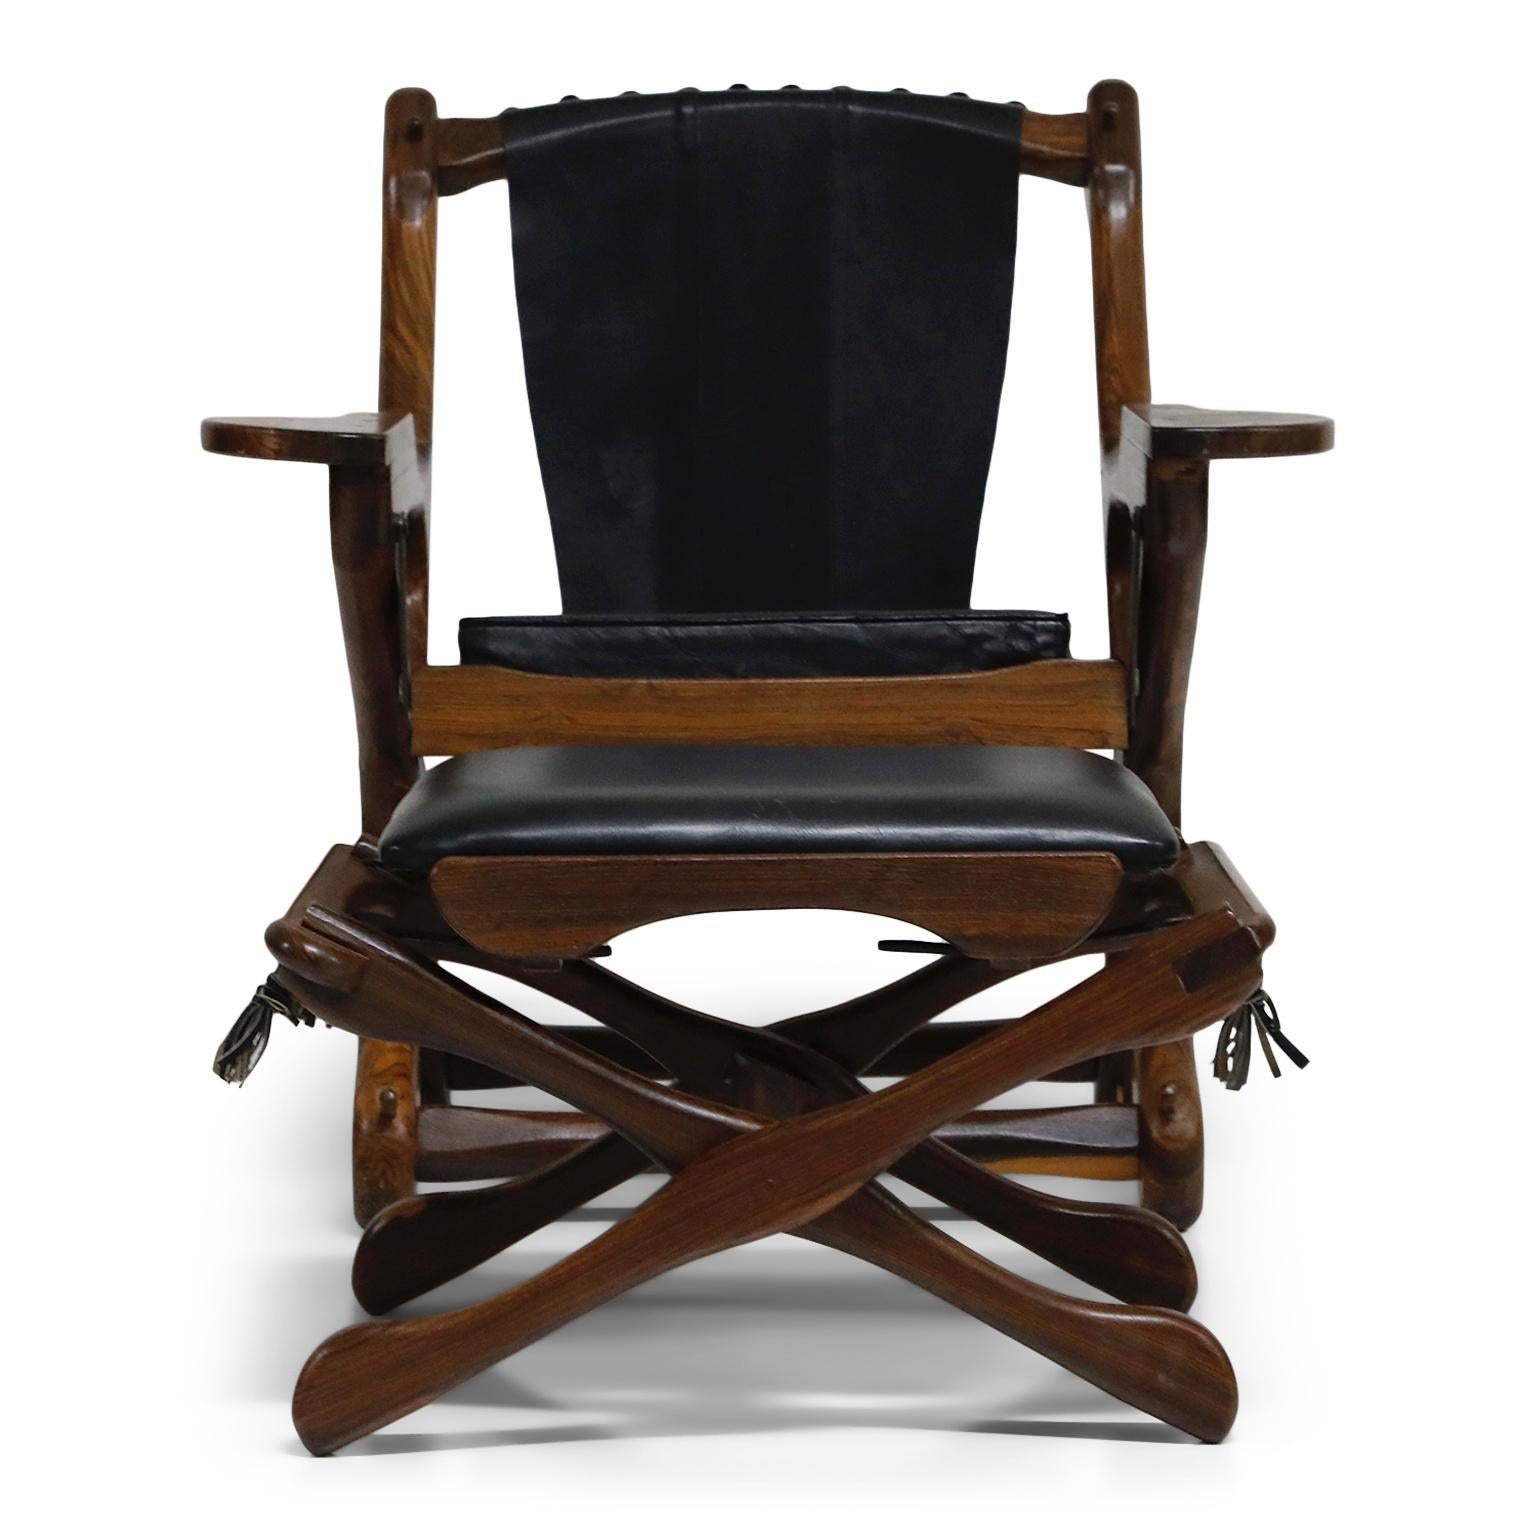 Named the 'Swinger Chair' for its pivoting mechanism that allows you to swing in your seat, this incredible Cocobolo Rosewood and black leather 'Swinger' chair with matching ottoman by leading 1960s modernist designer Don Shoemaker for Senal S.A.